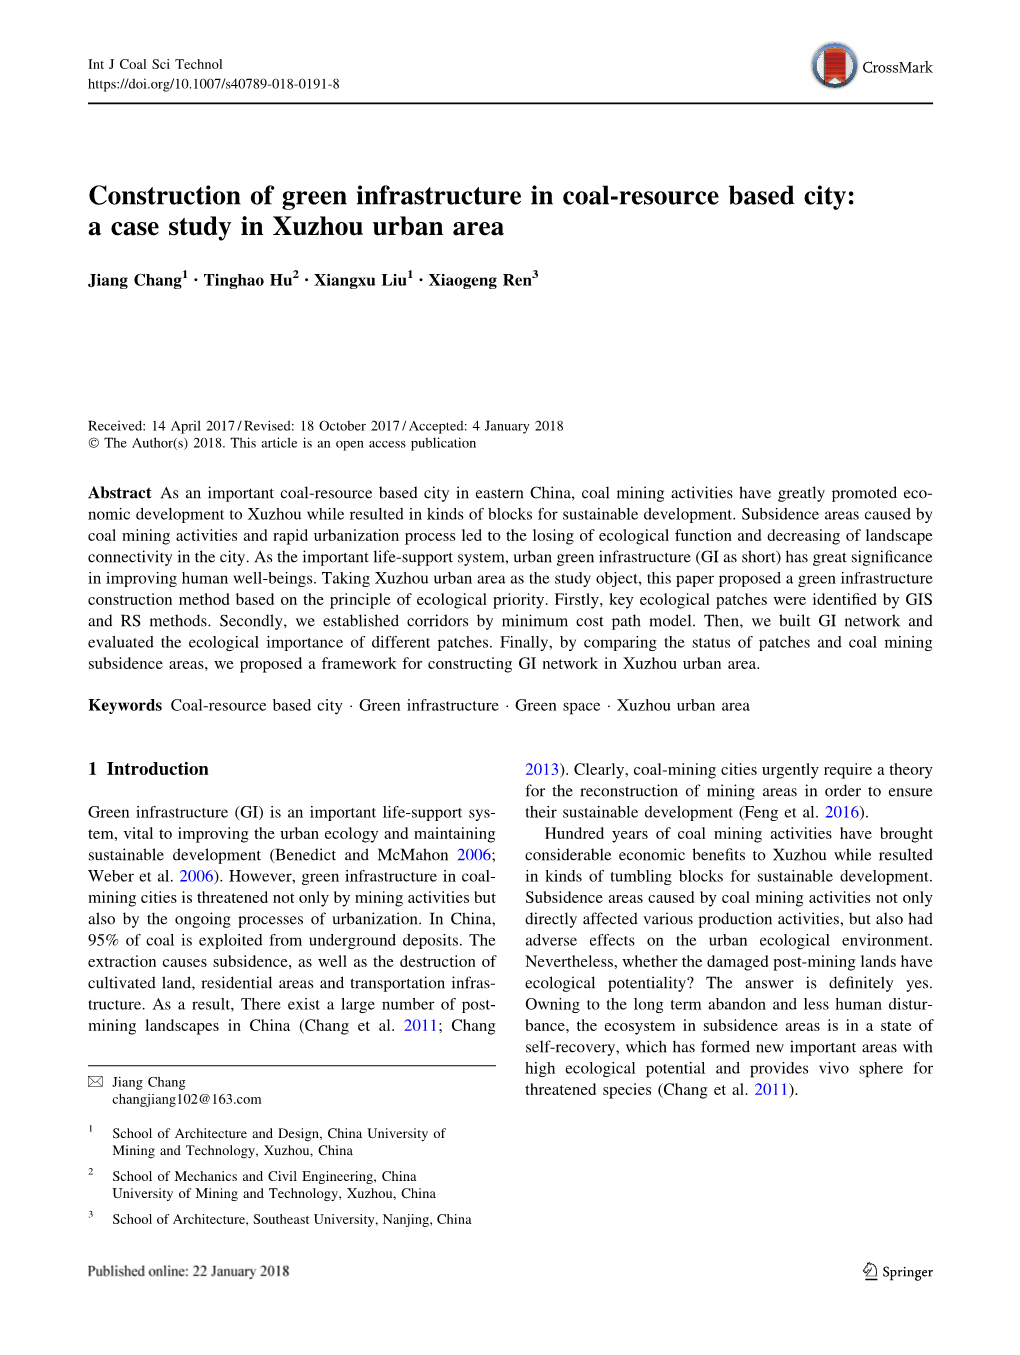 Construction of Green Infrastructure in Coal-Resource Based City: a Case Study in Xuzhou Urban Area